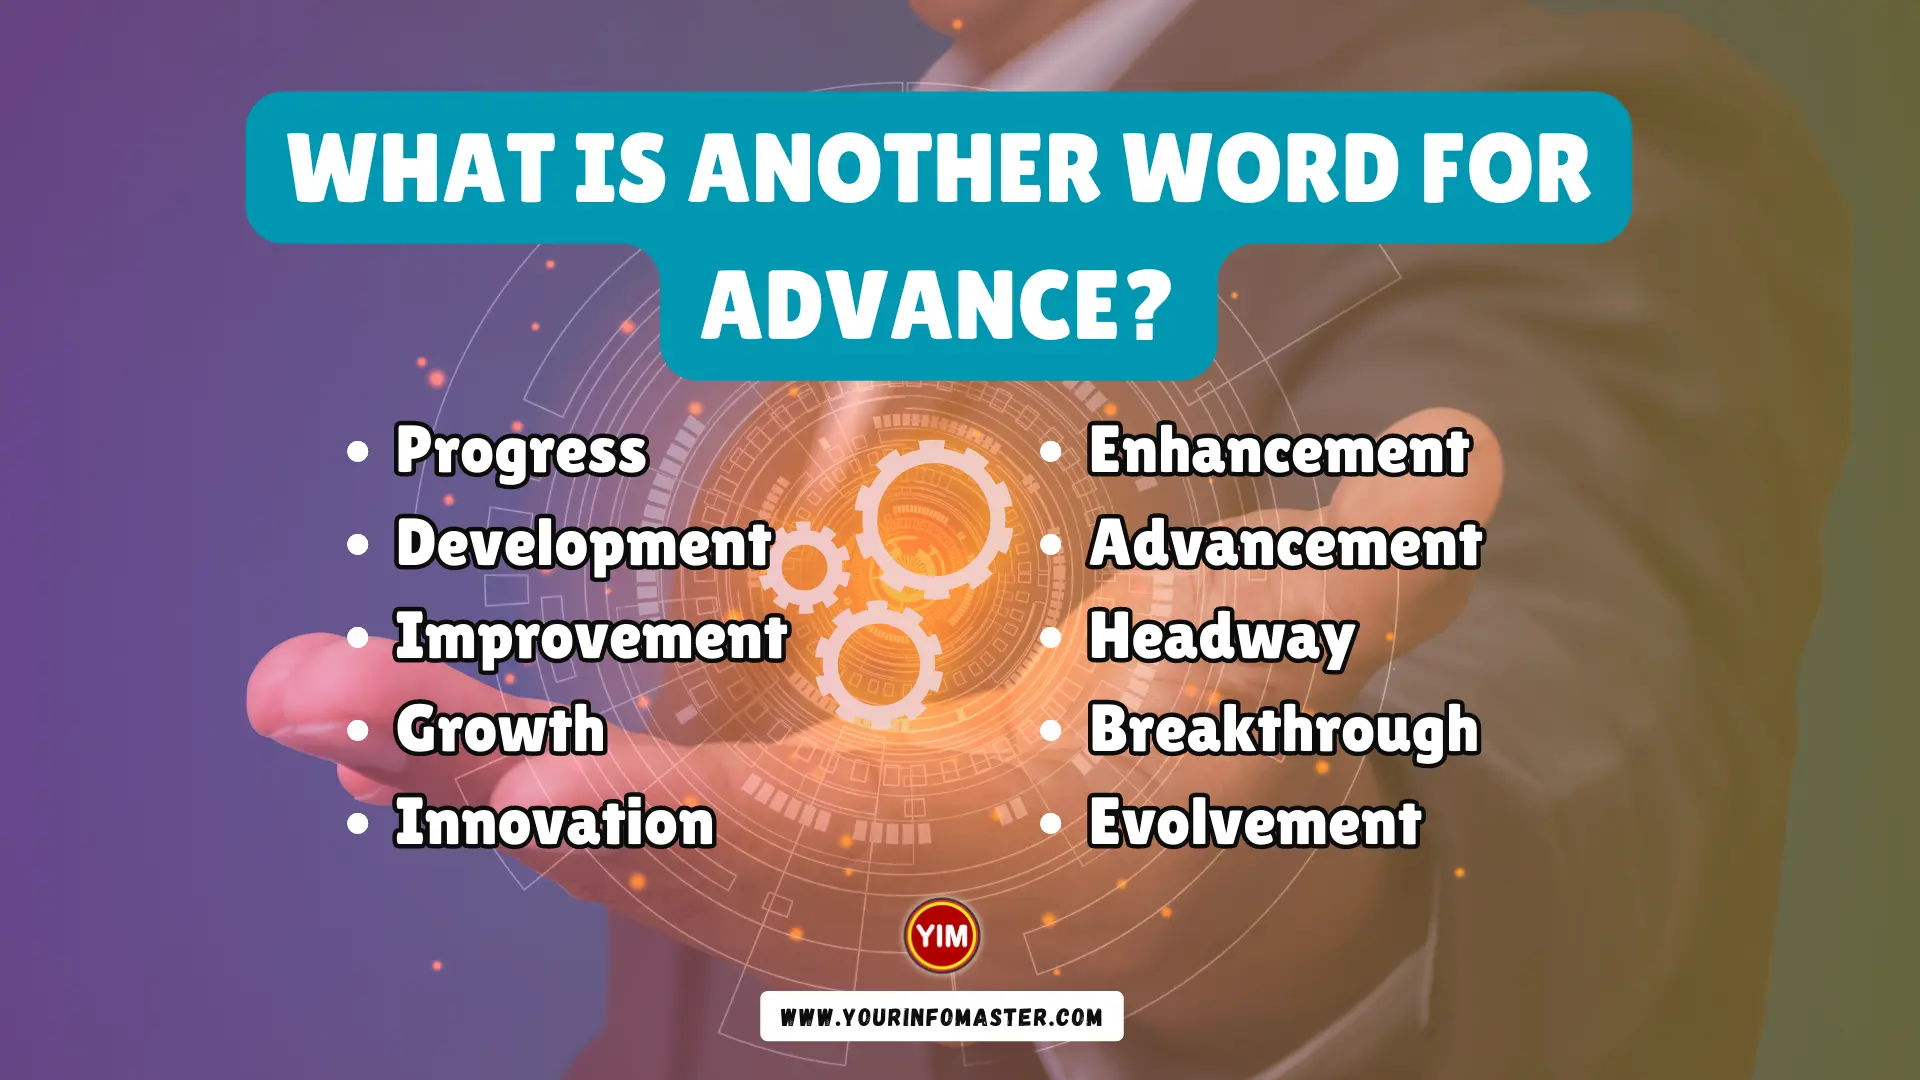 What is another word for Advance